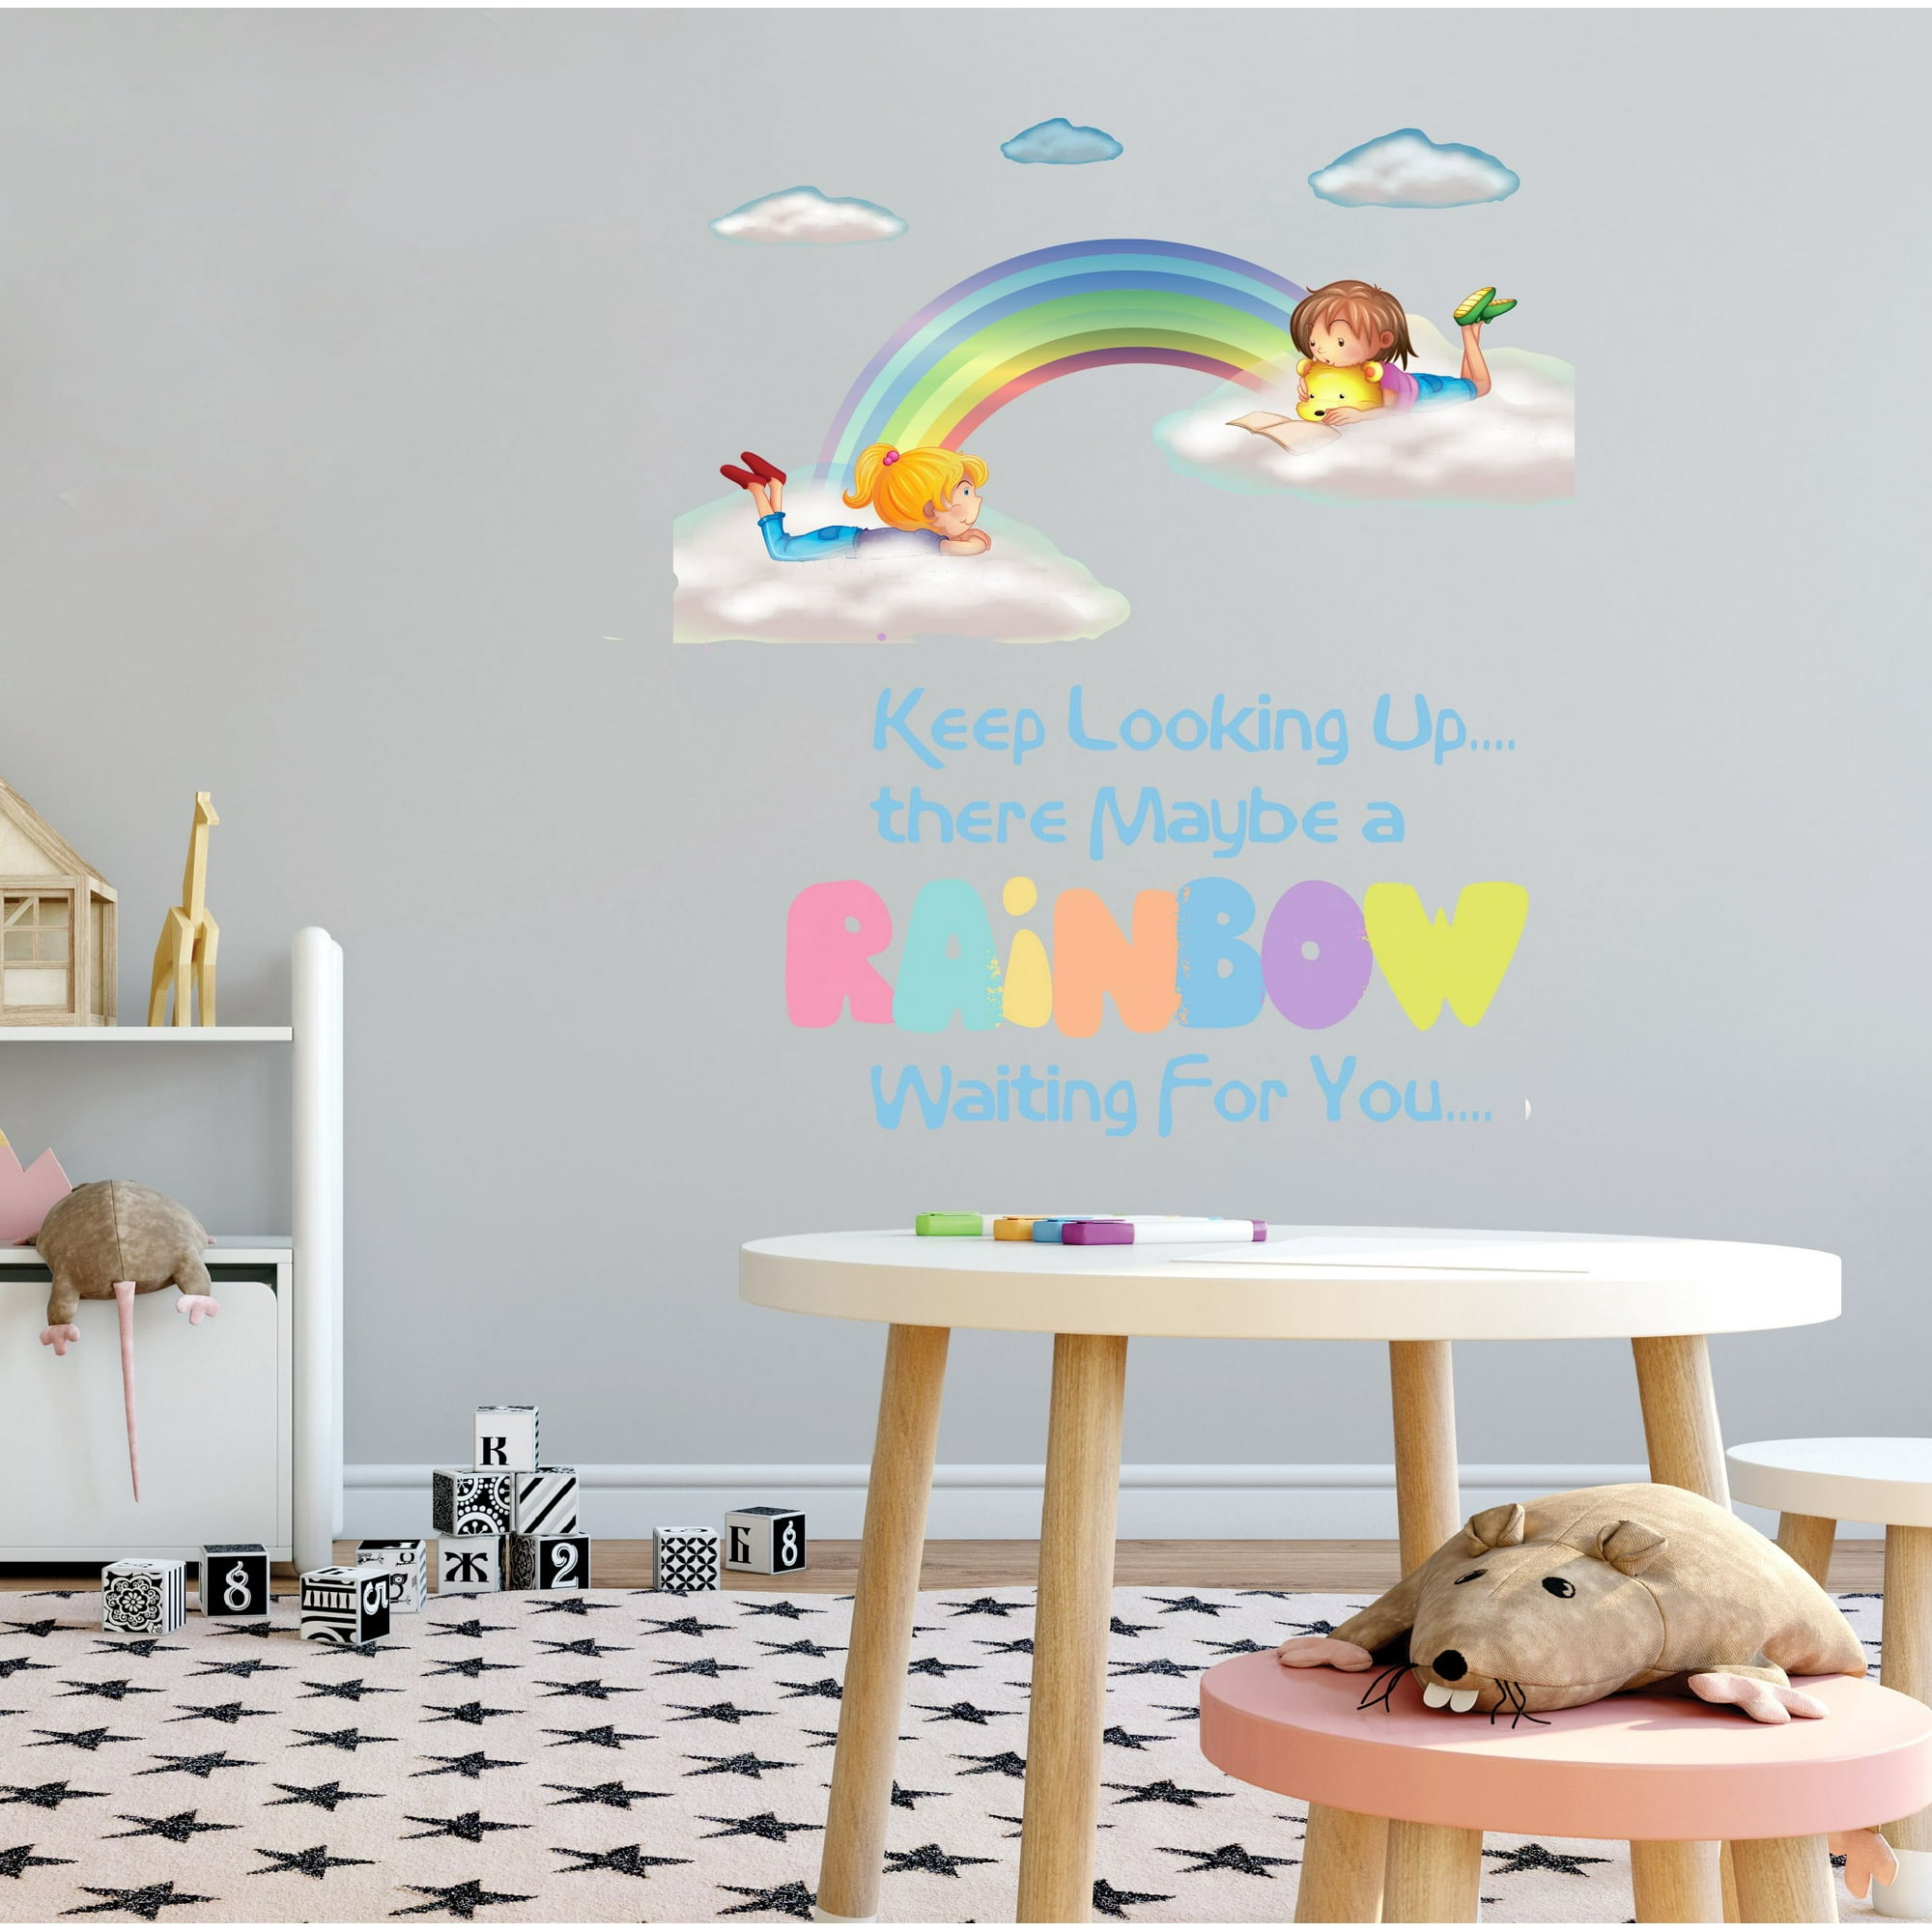 KIDS ROOM - Home Bedroom Inspirational Quotes Decoration Keep ...